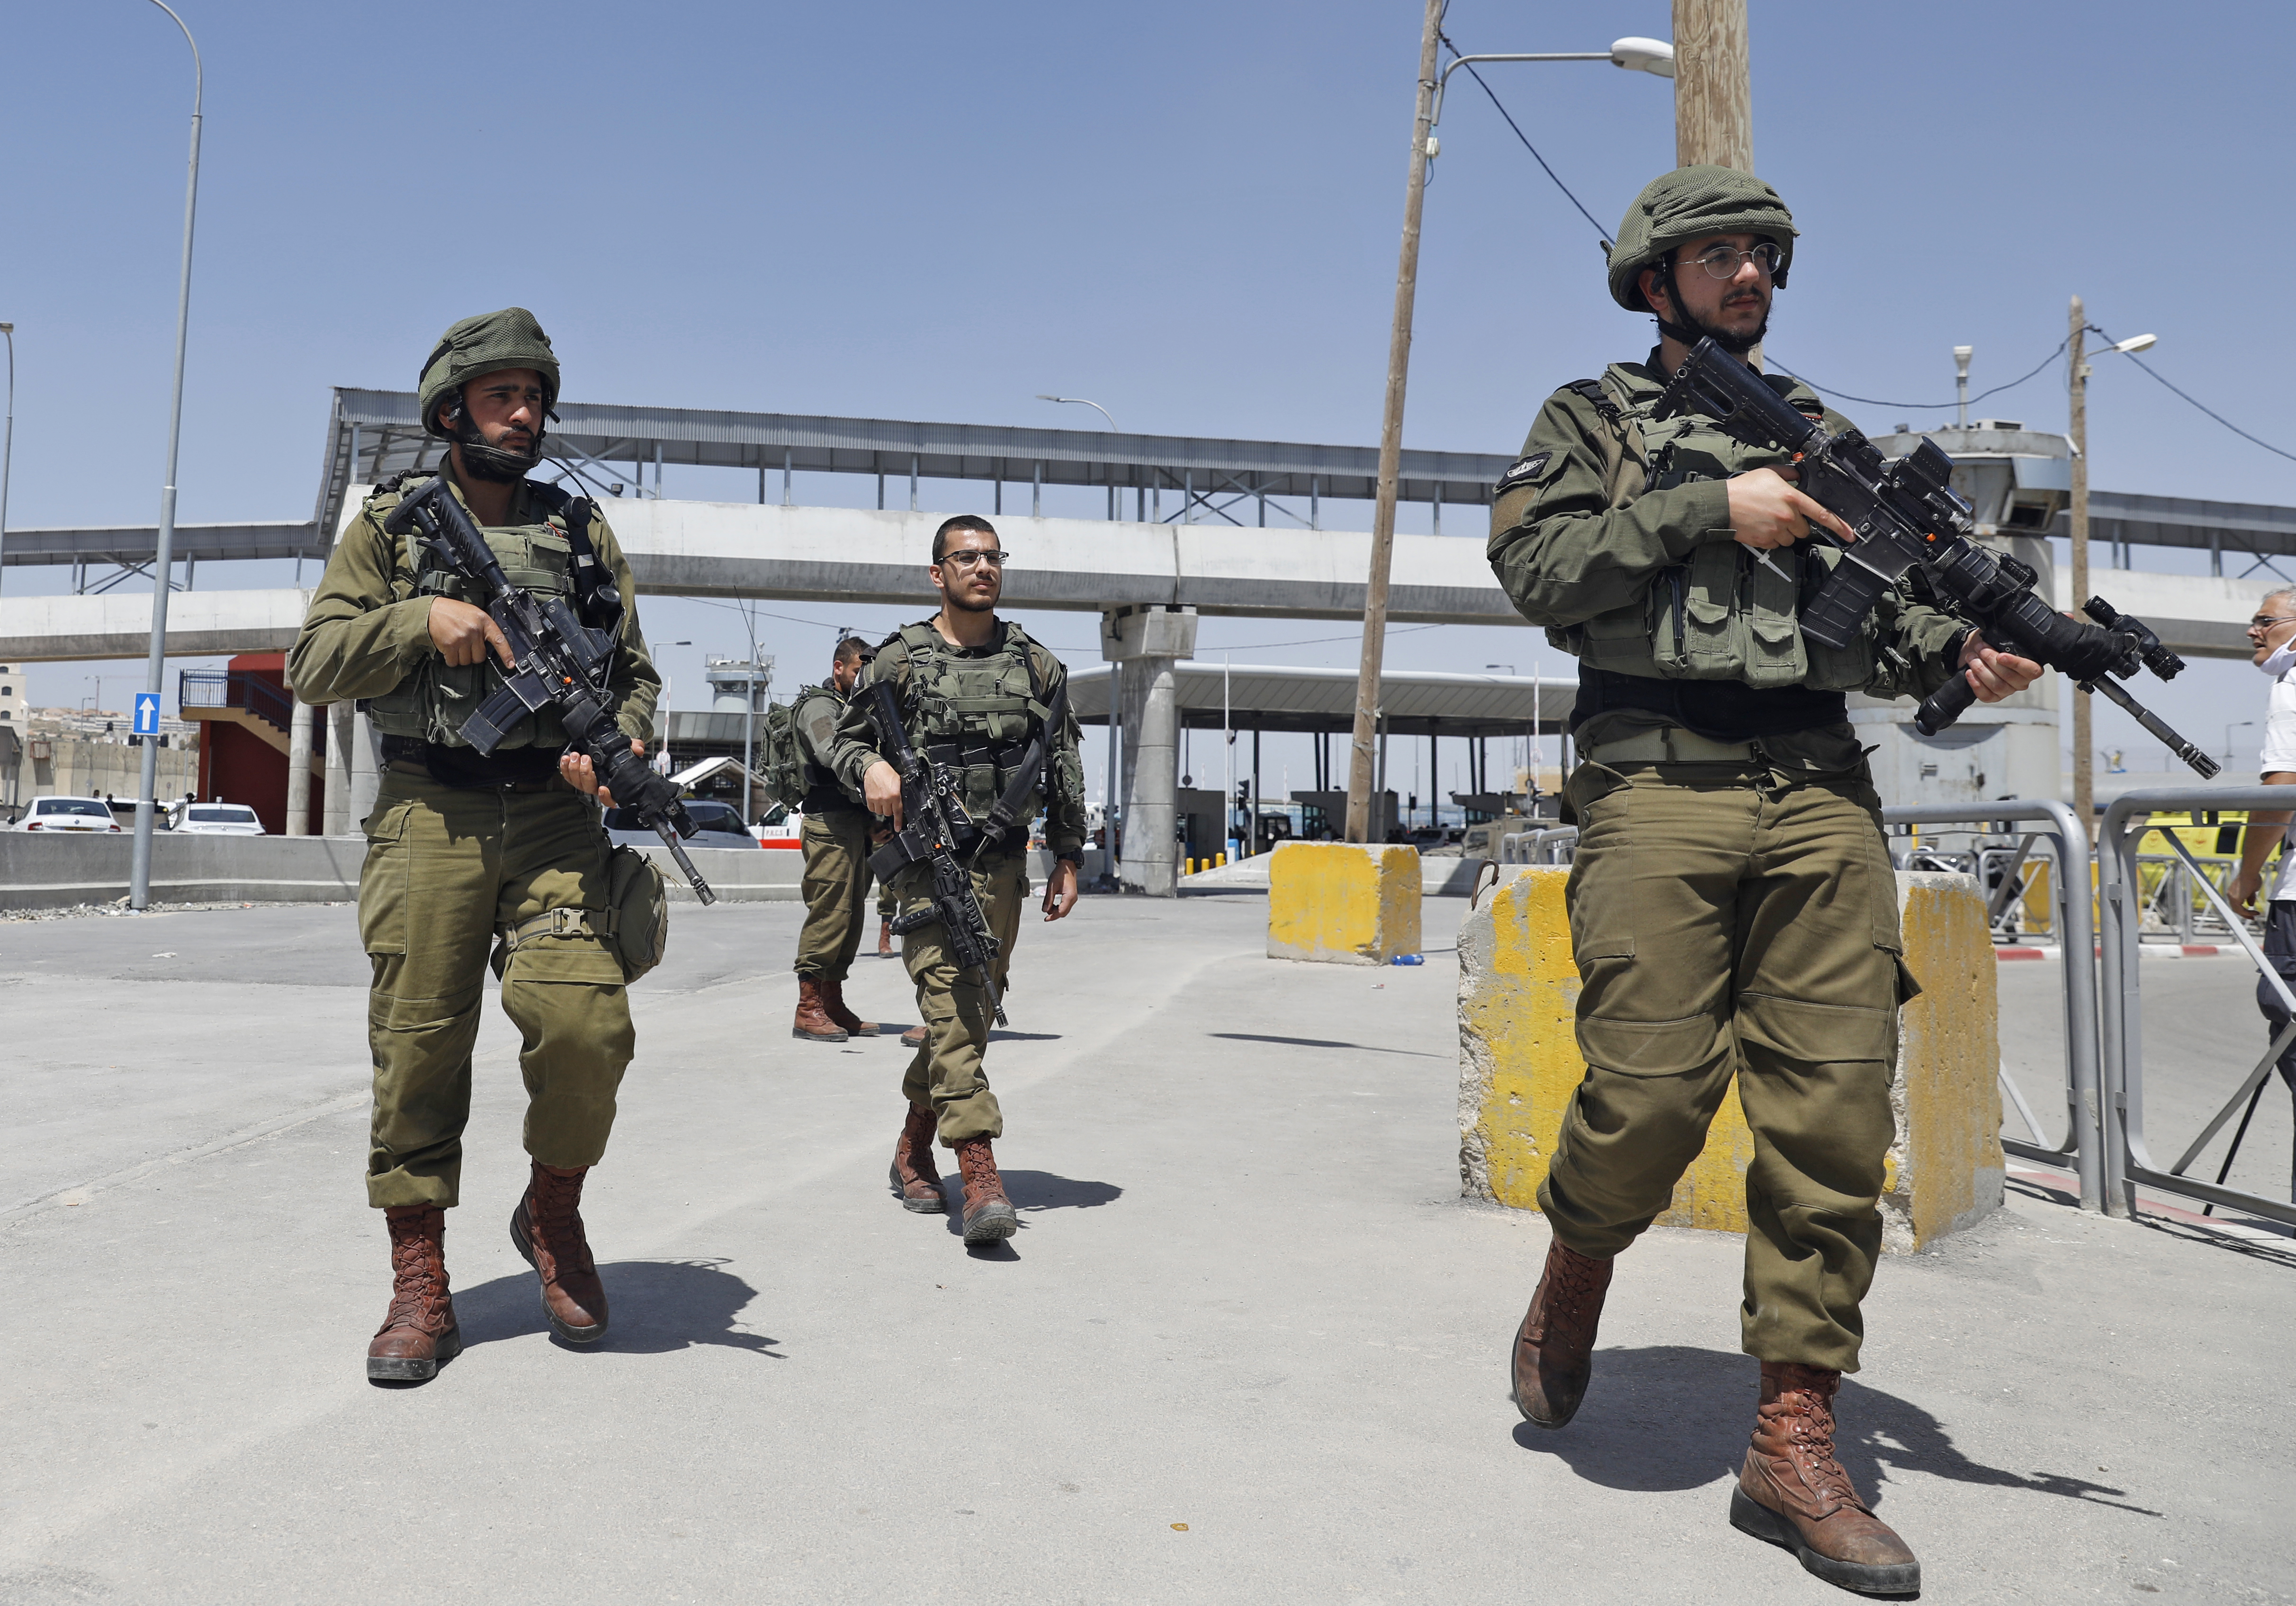 Israeli soldiers gather at the Qalandiya checkpoint in the occupied West Bank on 12 May (AFP)